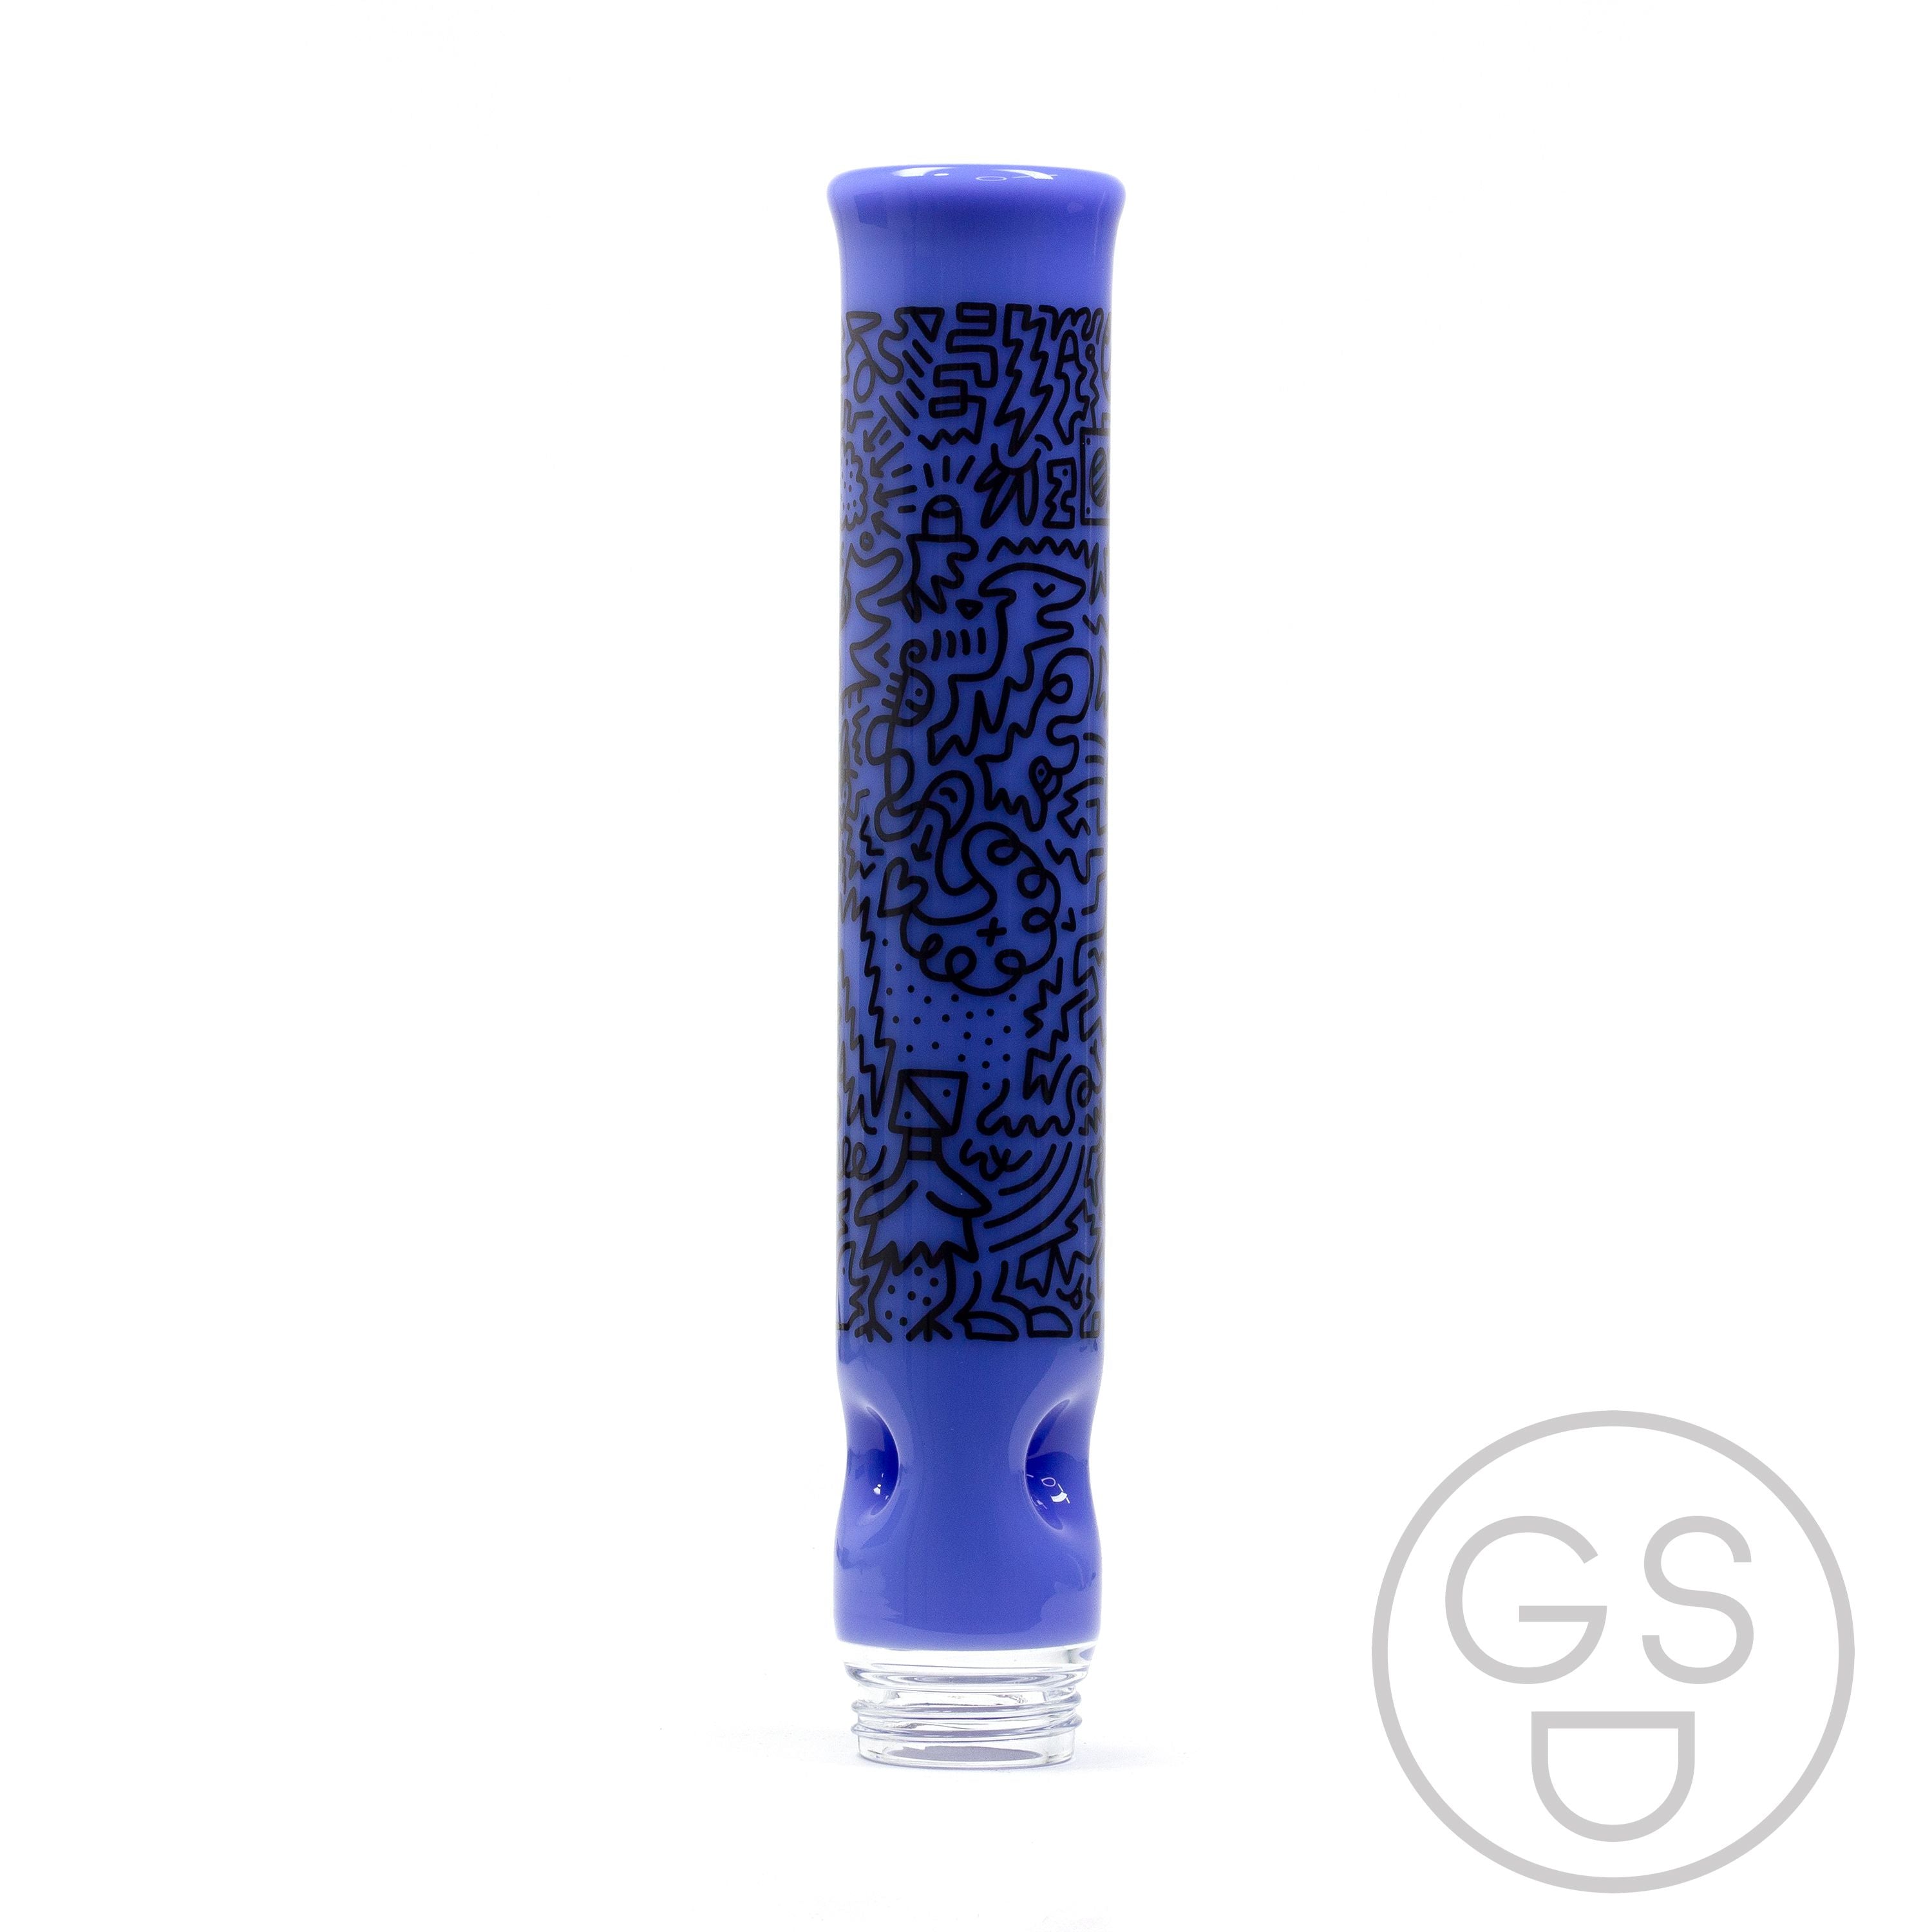 Prism Modular Waterpipe Tall Mouthpiece - Pretty Done / Blueberry